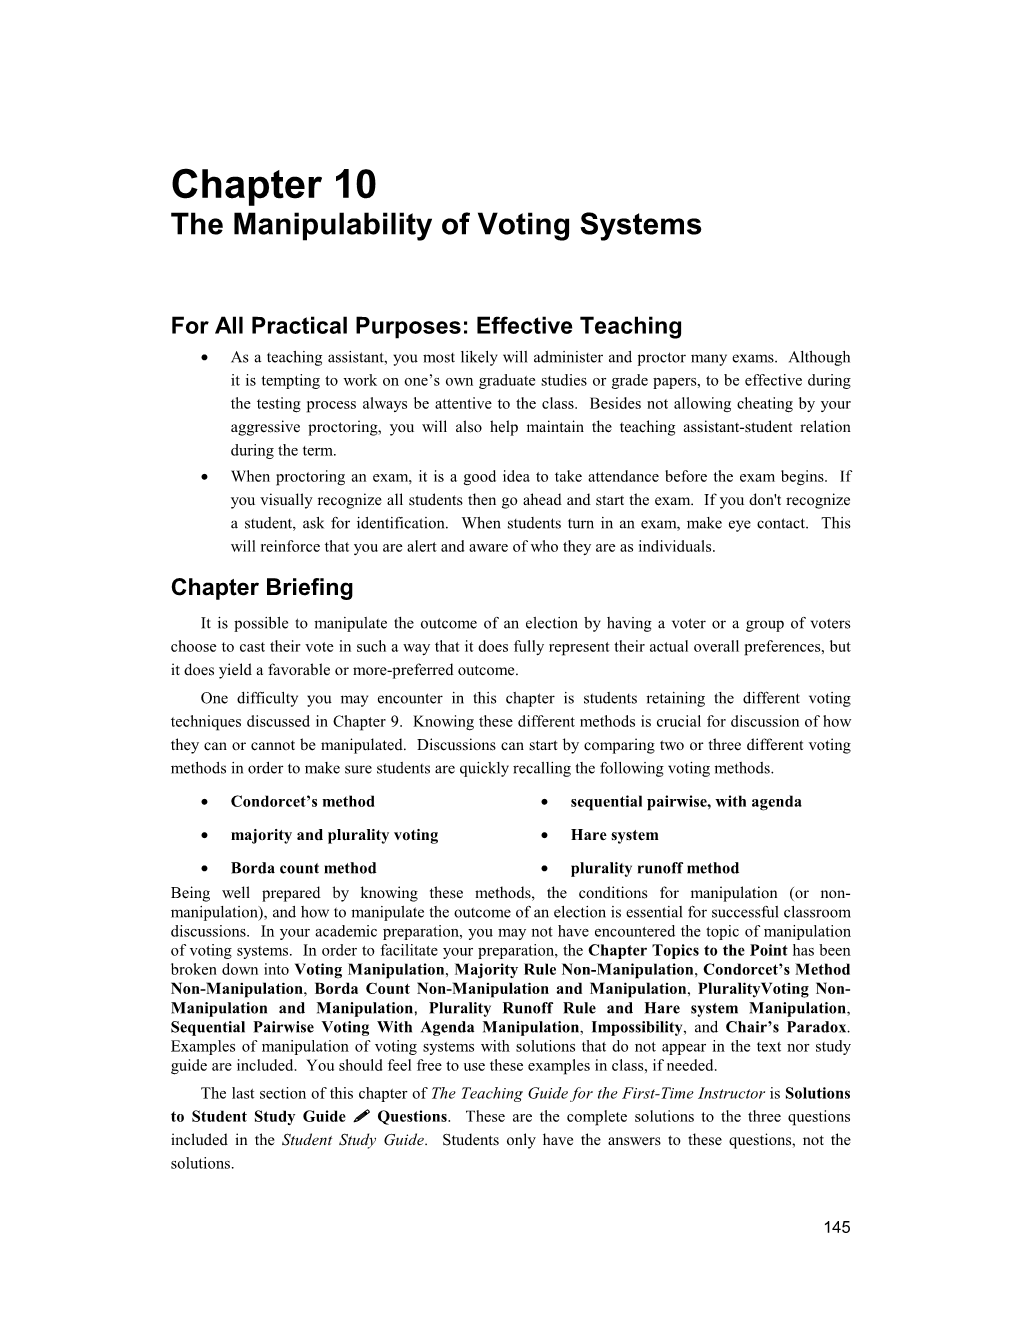 Chapter 10 the Manipulability of Voting Systems